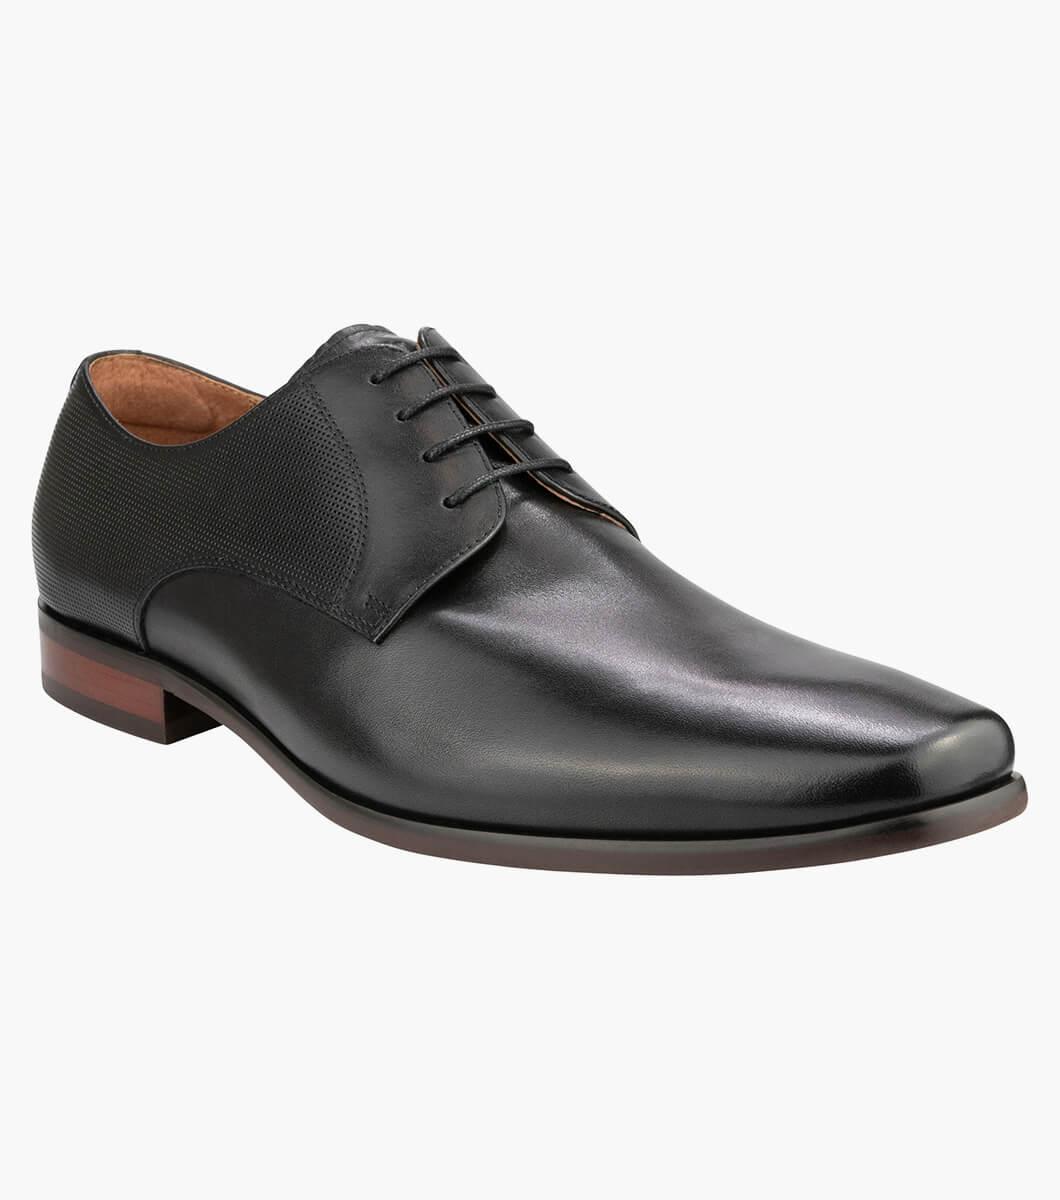 Postino Plain Shoe - Harrys for Menswearhttps://harrysformenswear.com.au/products/postino-plain-shoe  Florsheim Postino Plain Toe Derby The rich leather upper, leather linings, and leather covered footbed of the Florsheim Postino Plain Toe Derby gives this shoe a rich feel inside and out. For versatile style and all-day comfort, the Postino always delivers. Waxy calf leather upper Leather and Suedetec linings that are …